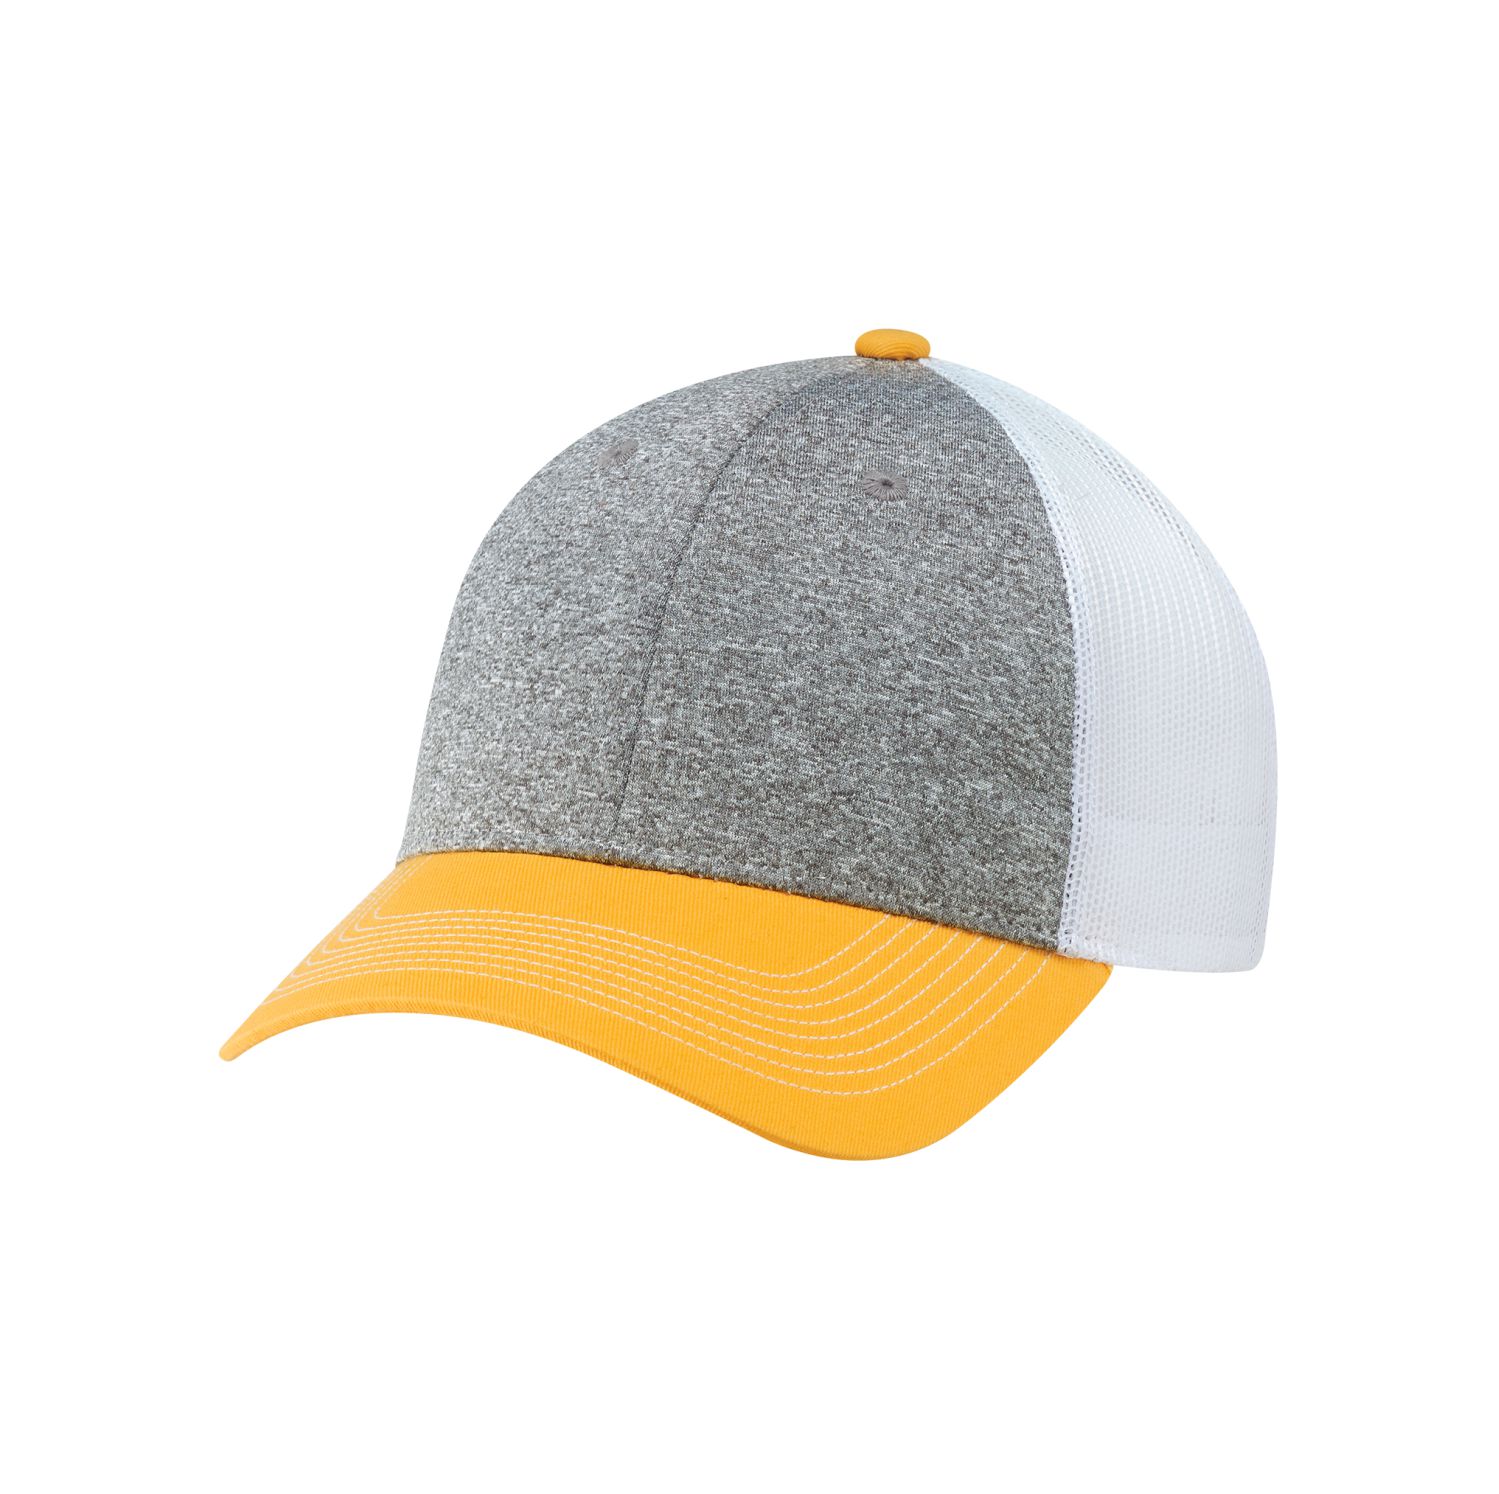 AJM Cotton Drill / Polyester Heather / Nylon Mesh 6 Panel Constructed Full-Fit Hat (Mesh Back) #4G645M Gold / Charcoal / White